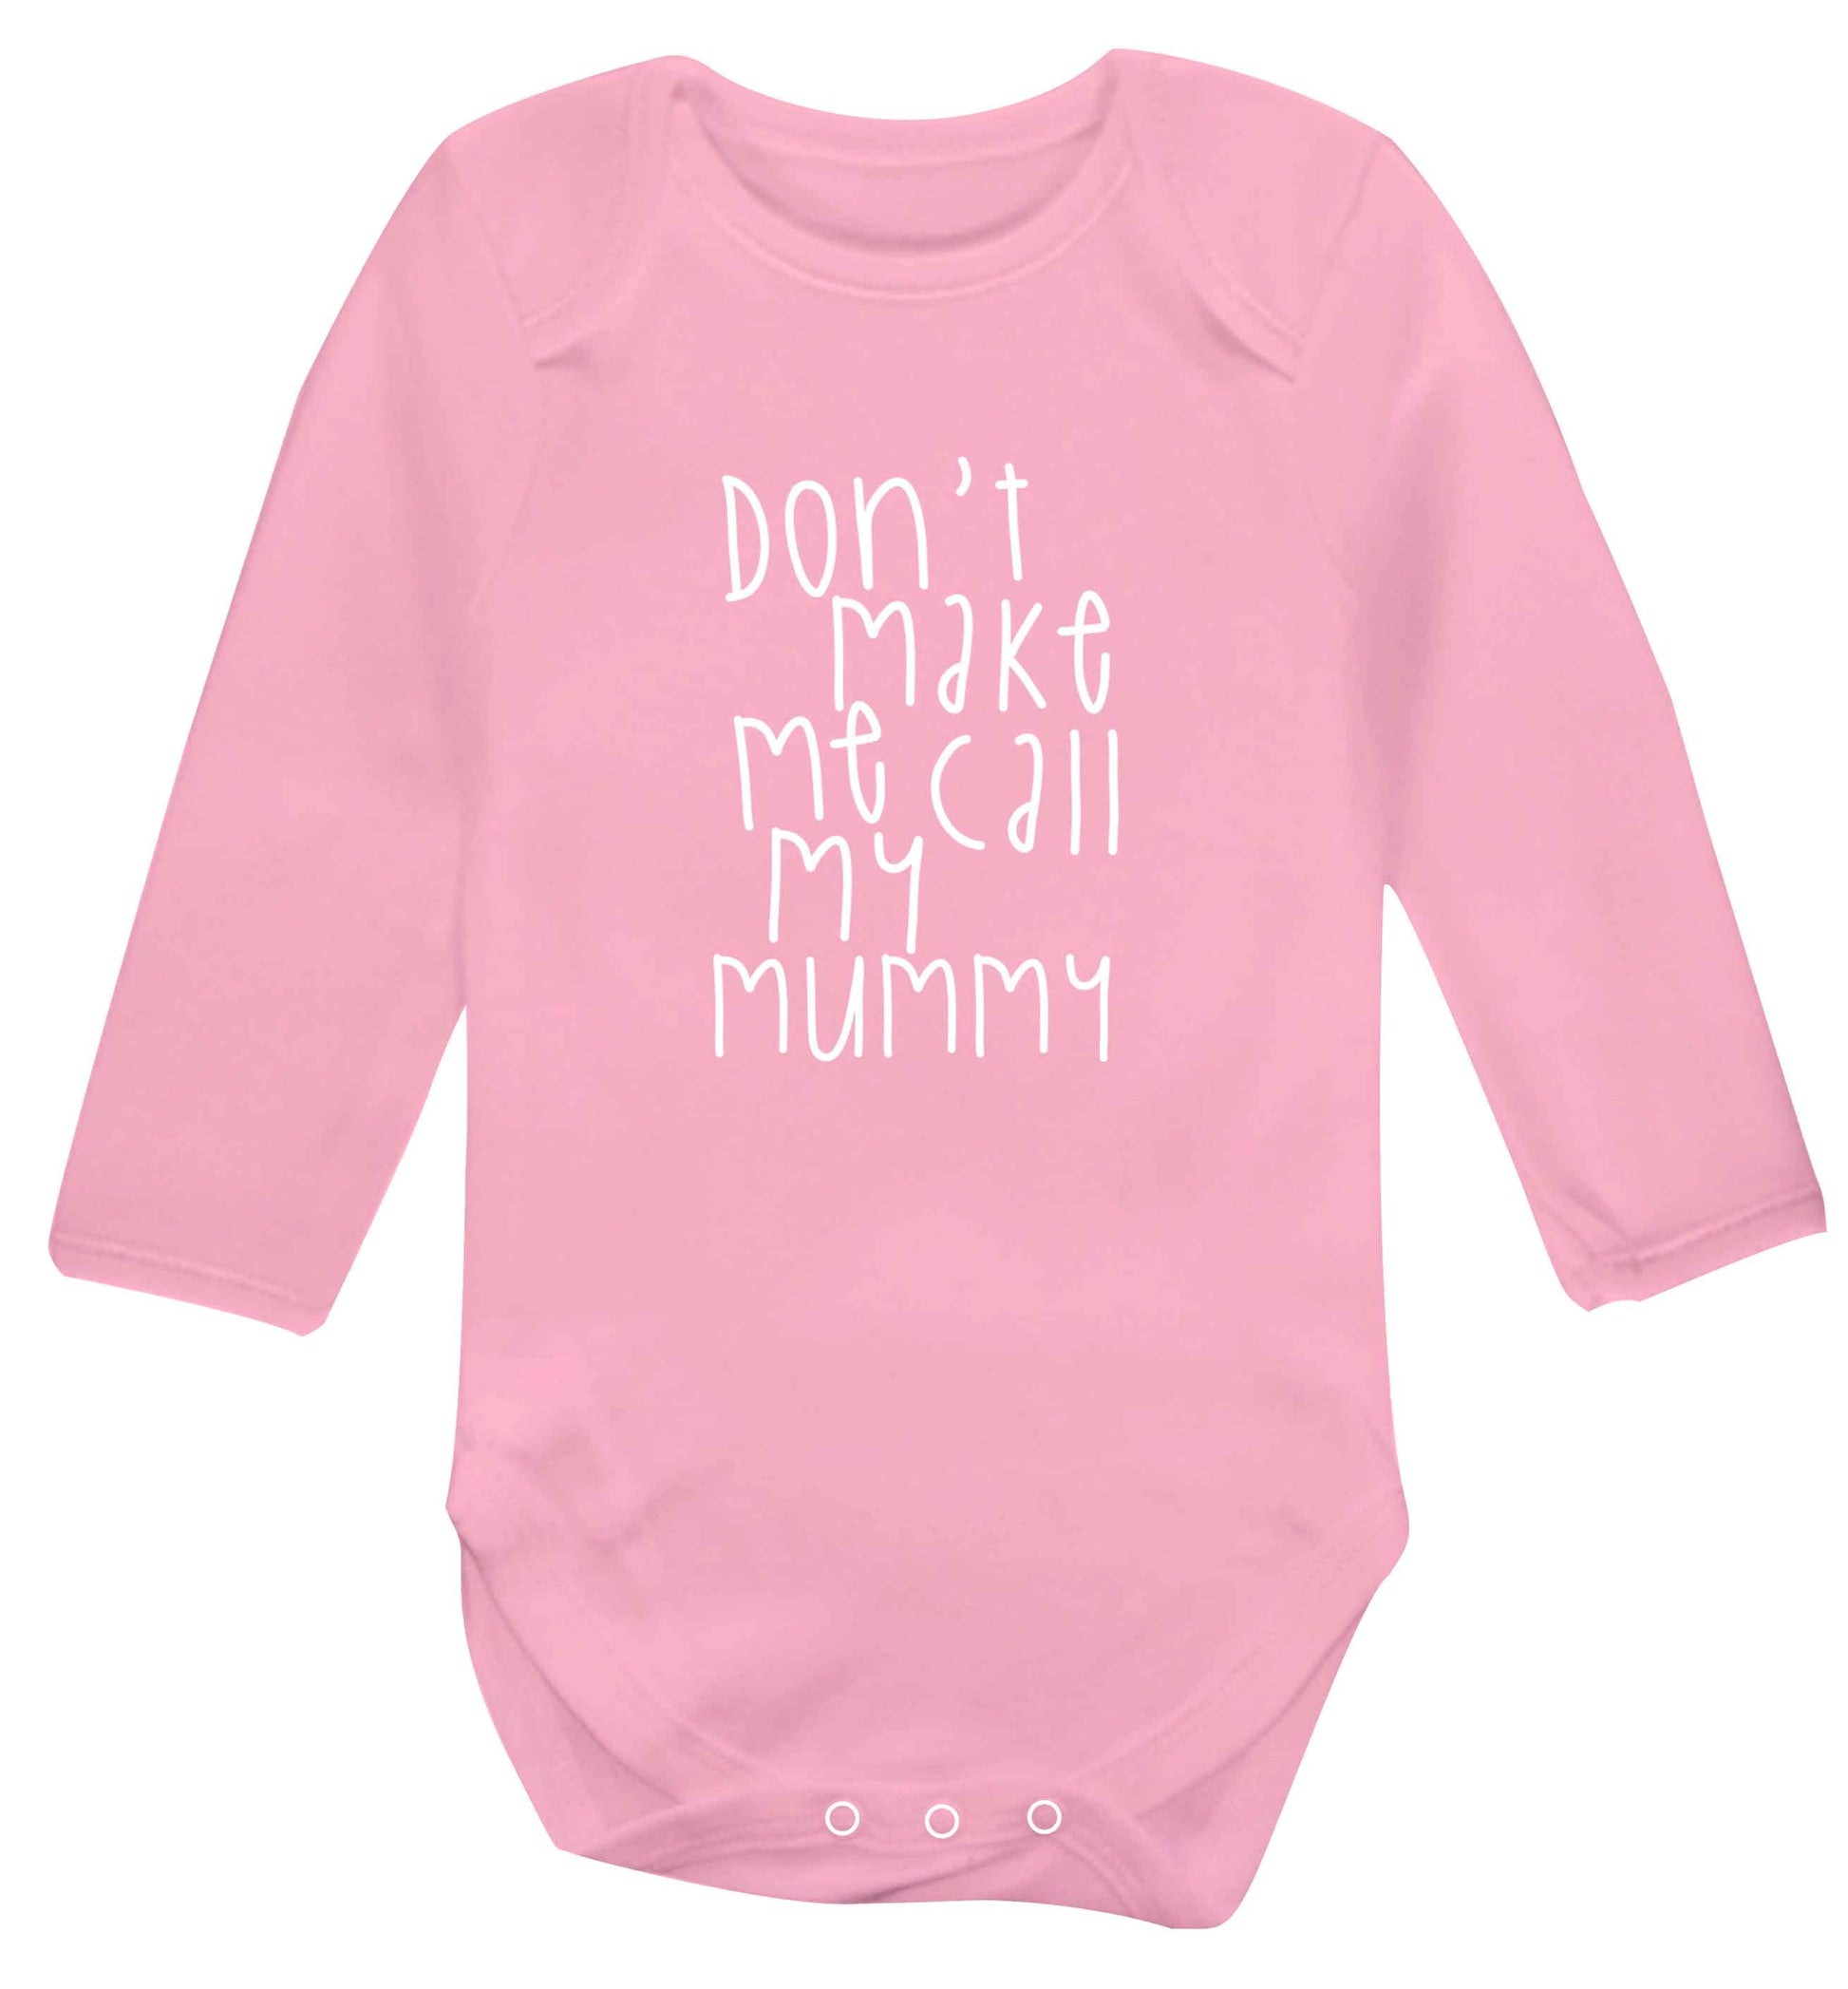 Don't make me call my mummy baby vest long sleeved pale pink 6-12 months